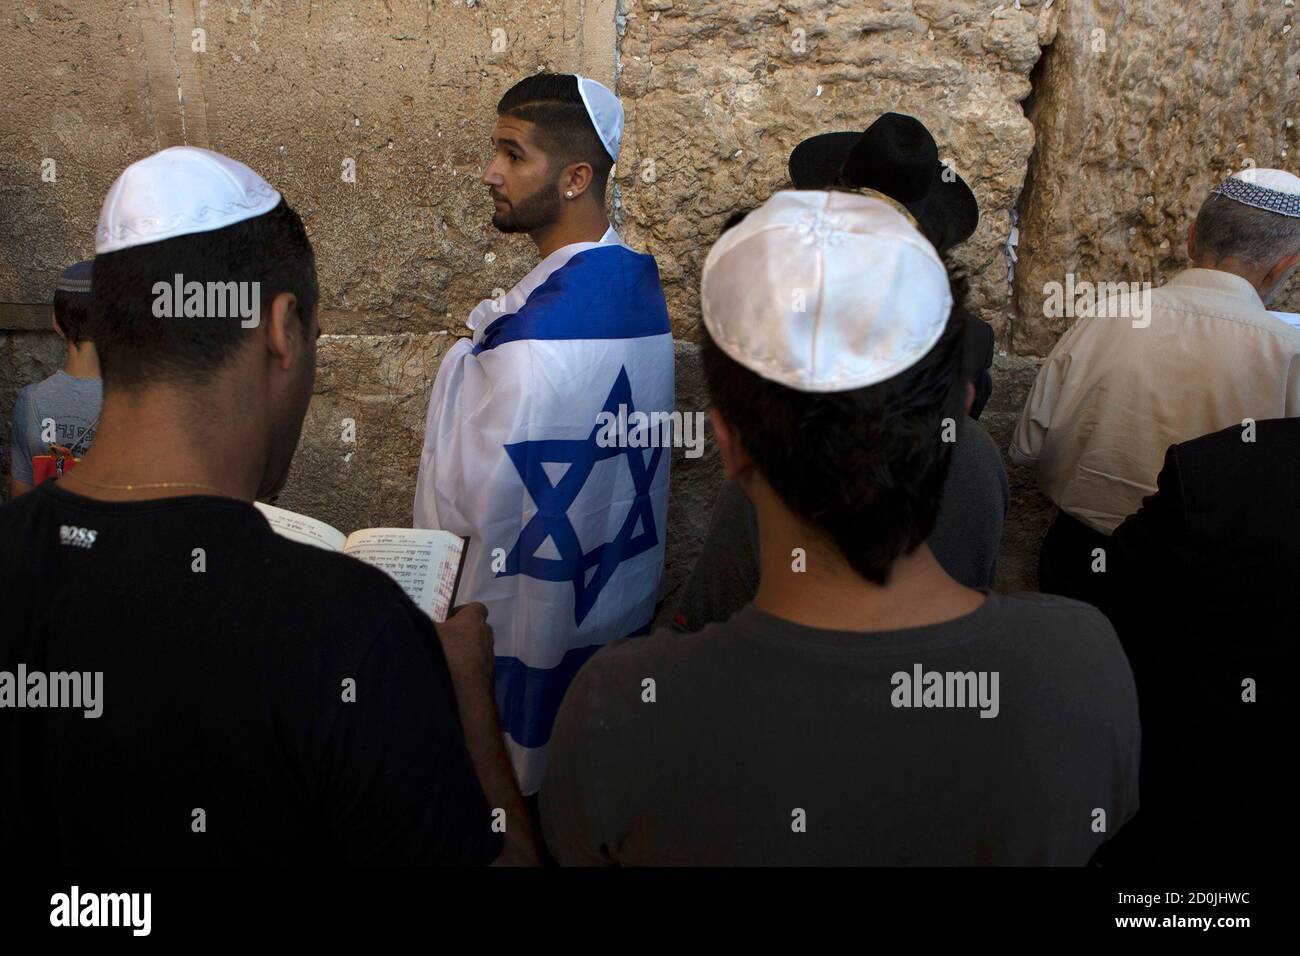 A Jewish worshipper, wrapped in an Israeli flag, attends a special prayer at the Western Wall in Jerusalem's Old City for the well-being of Israeli soldiers in Gaza July 23, 2014. Gaza fighting raged on Wednesday, displacing thousands more Palestinians in the battered territory as U.S. Secretary of State John Kerry said efforts to secure a truce between Israel and Hamas had made some progress. Israel announced that three of its soldiers were killed by explosive devices on Wednesday, lifting the army death toll to 32.  REUTERS/Siegfried Modola (JERUSALEM - Tags: RELIGION CIVIL UNREST CONFLICT) Stock Photo